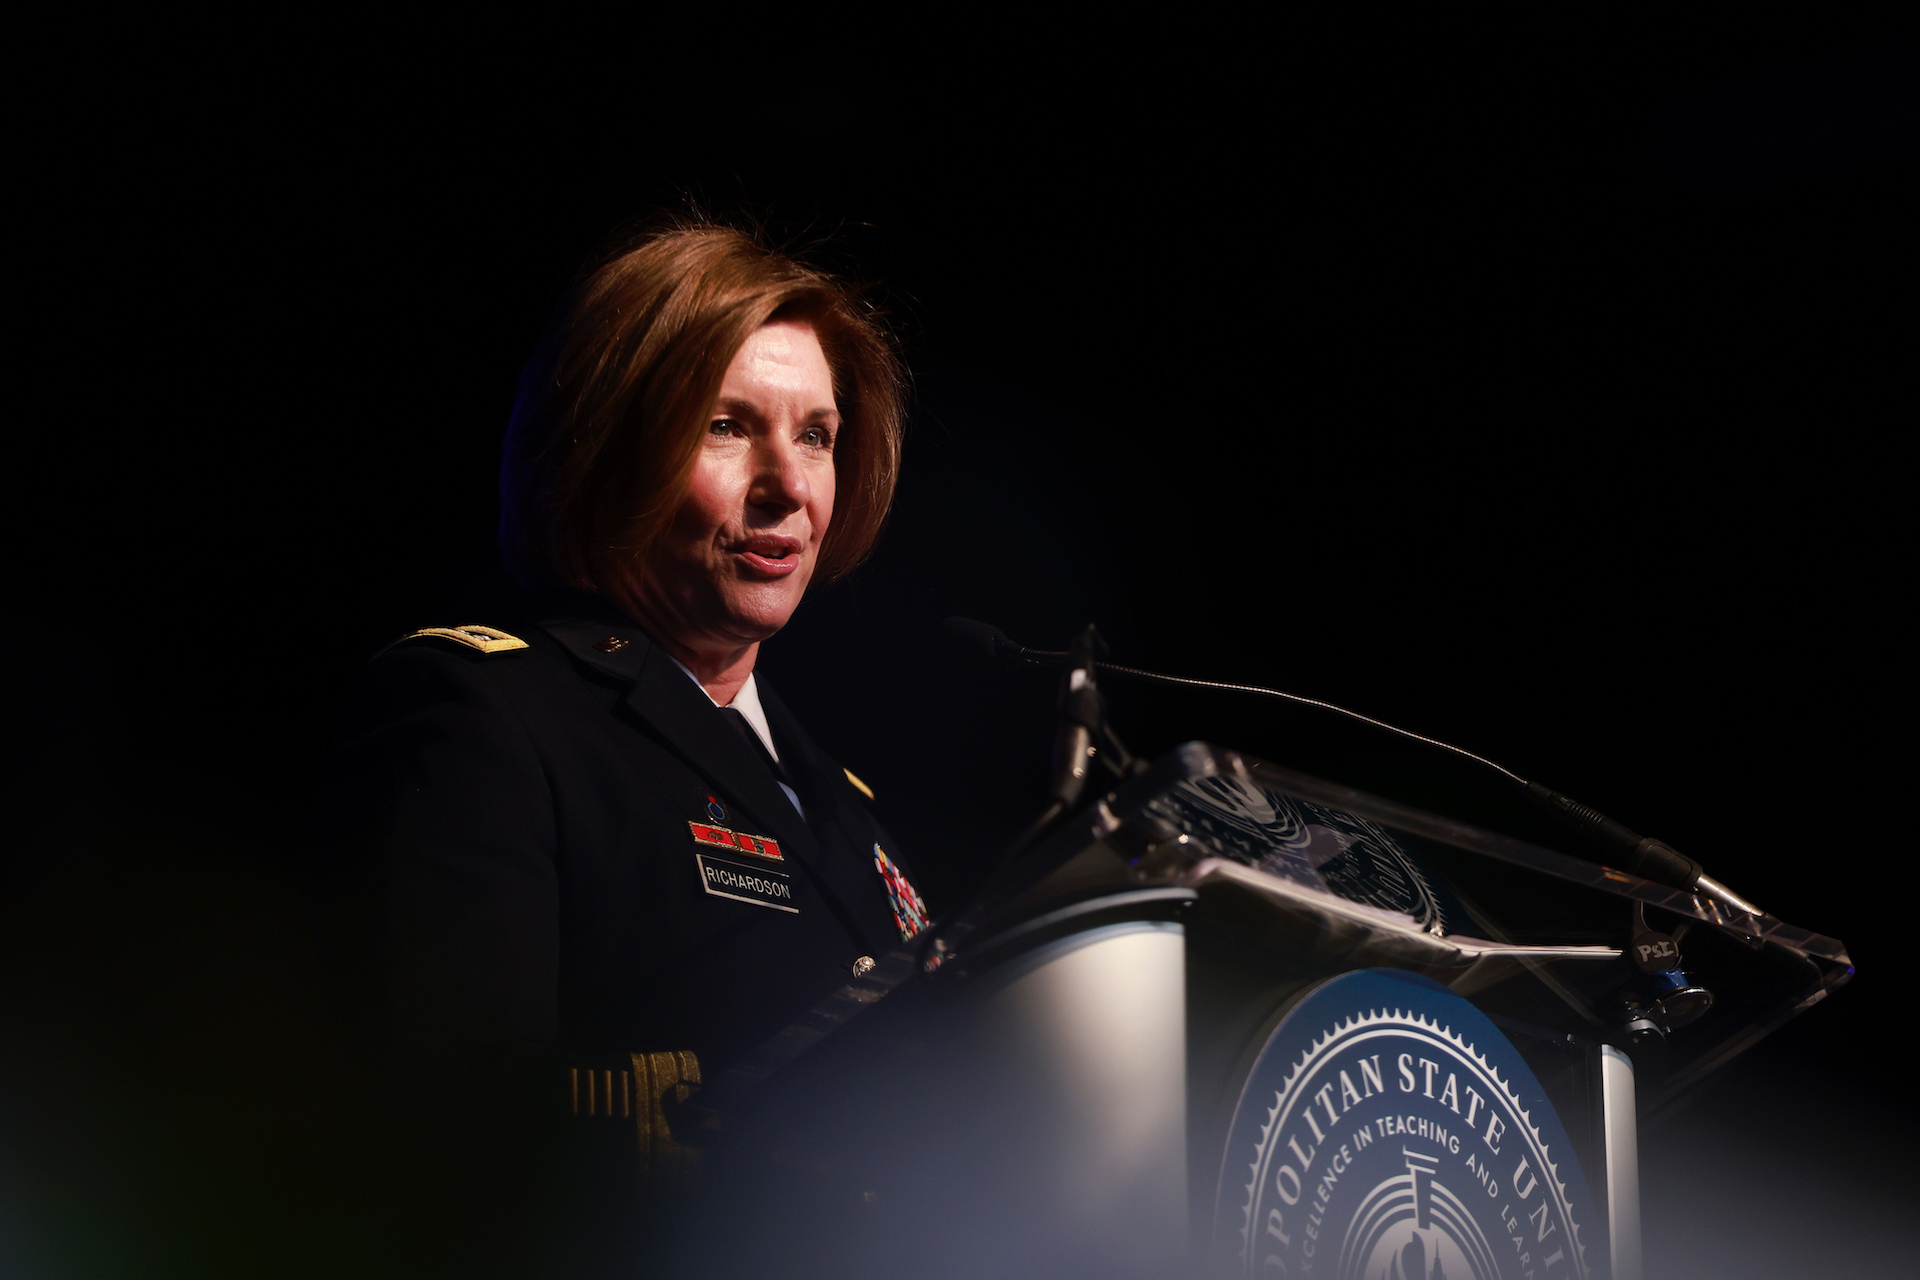 Military Offers Women Unique Challenges and Opportunities, Generals Say